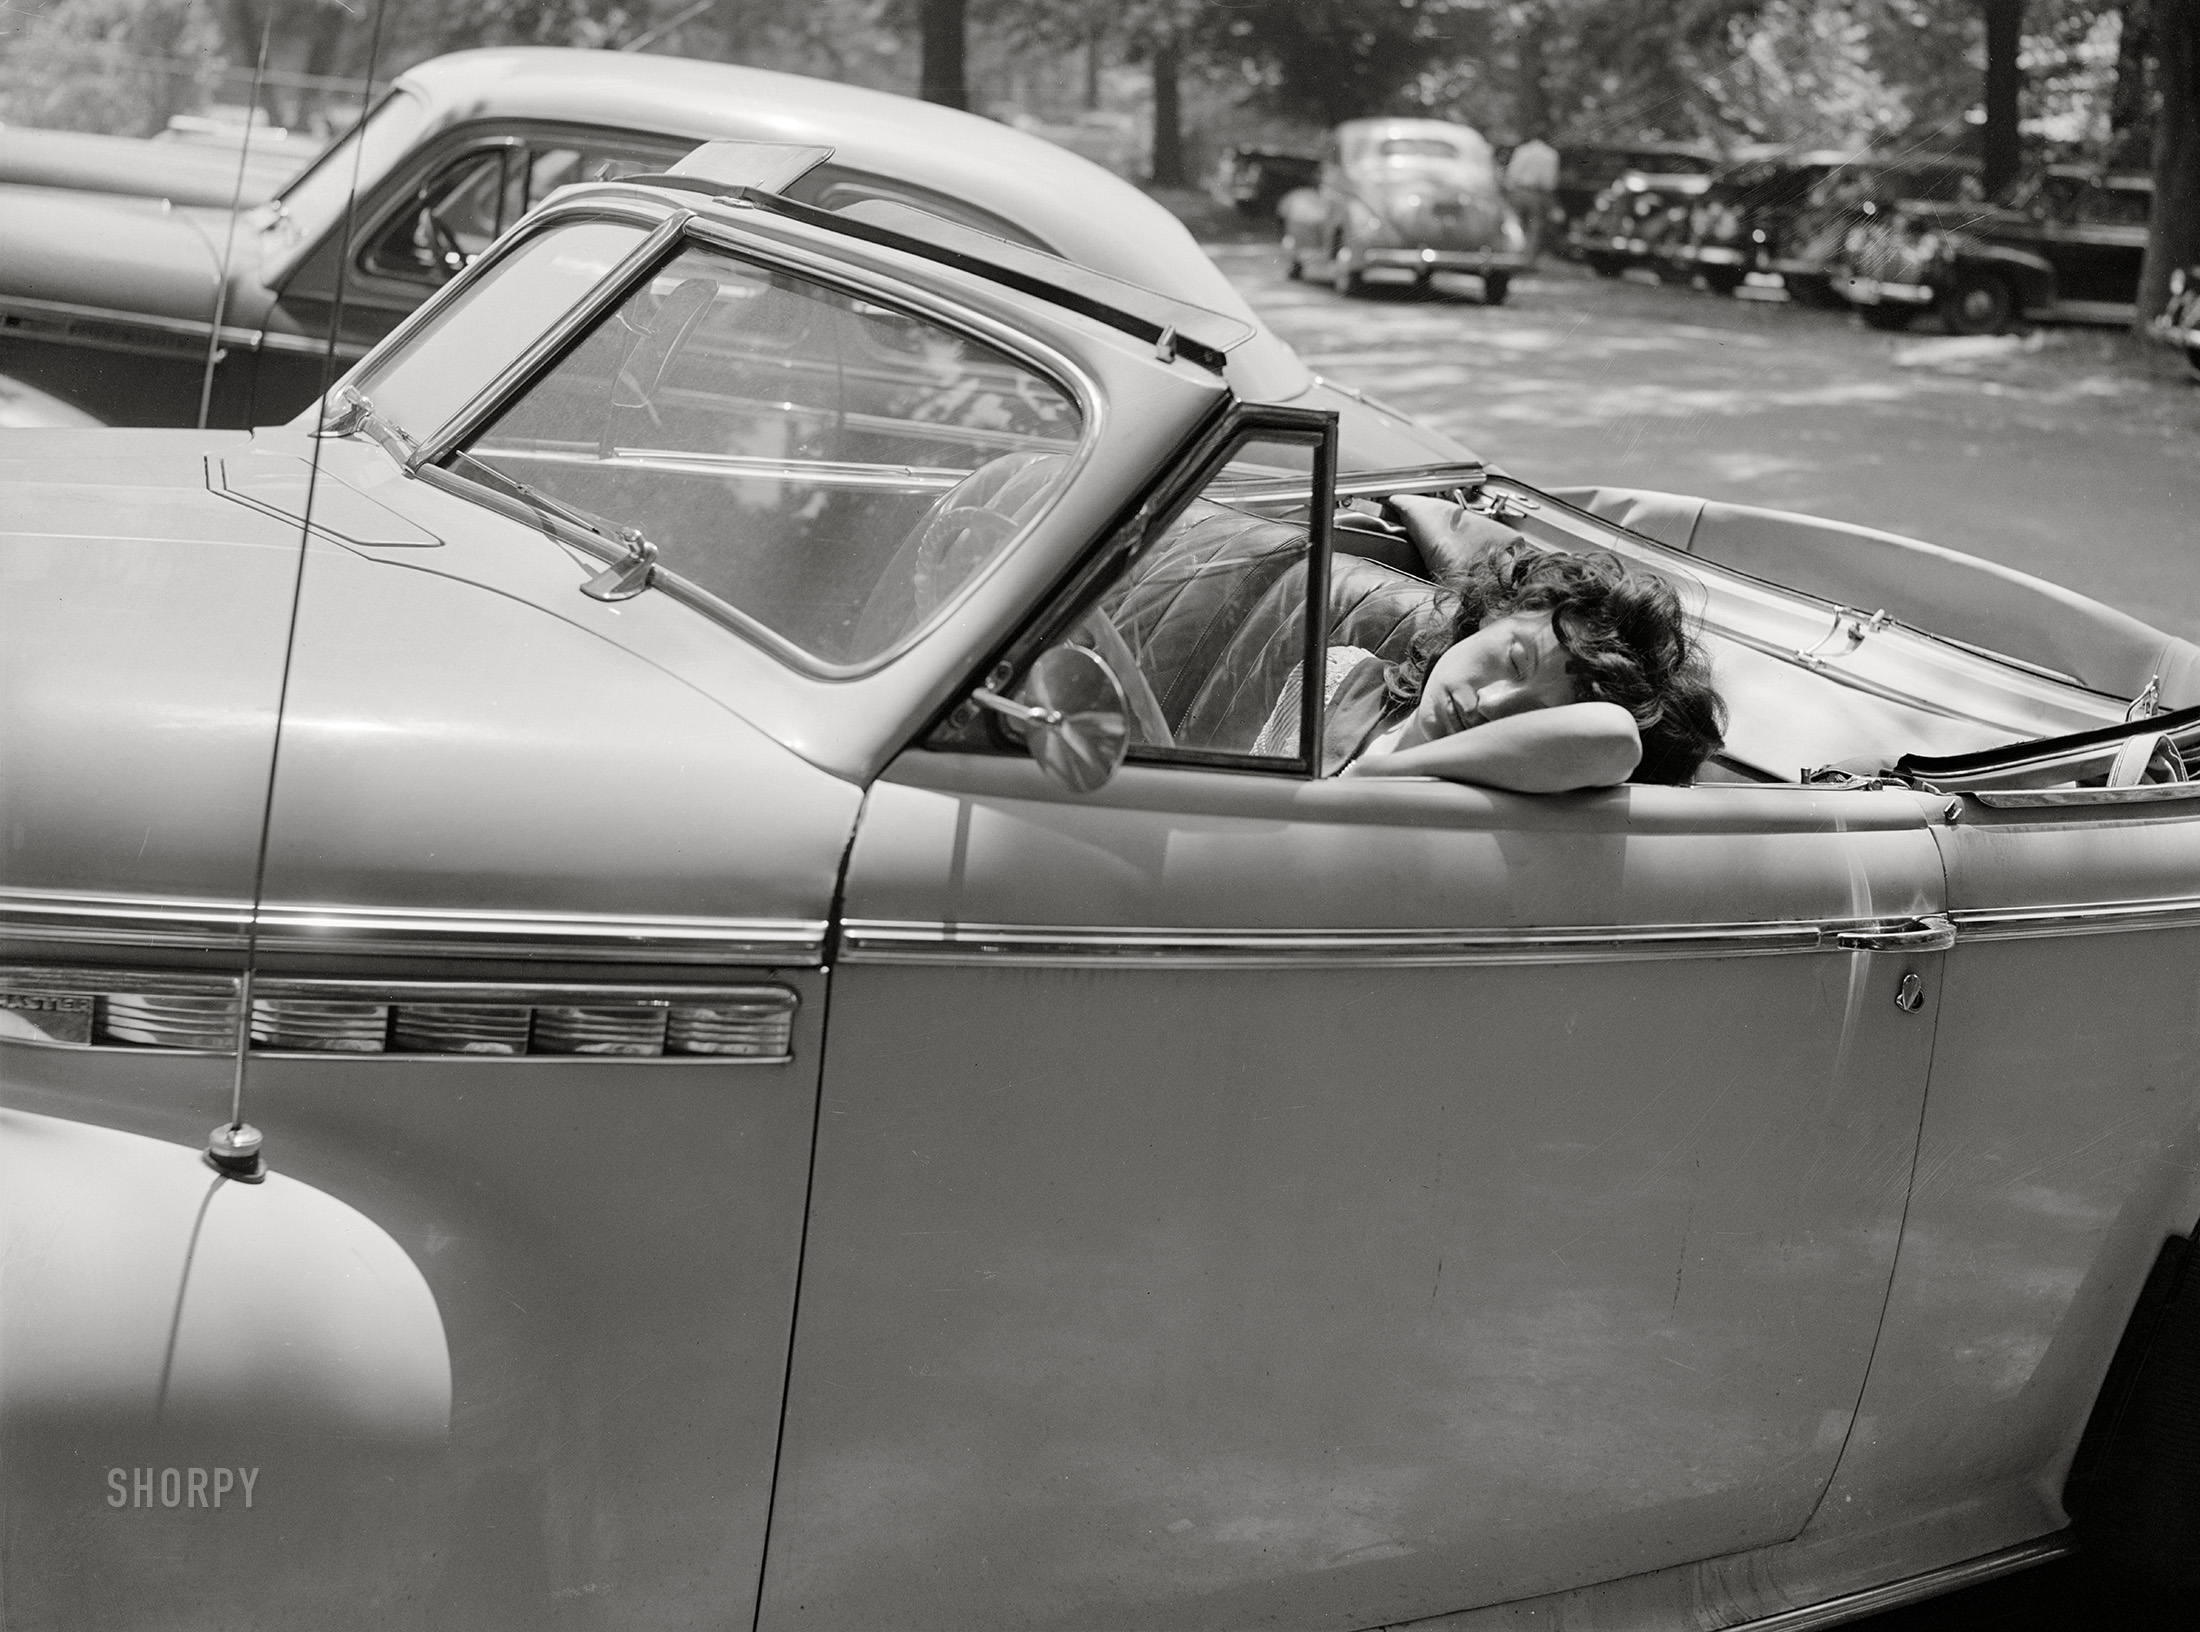 July 1942. Washington, D.C. "Sunday in Rock Creek Park. Girl sleeping in a car." Medium format acetate negative by Marjory Collins for the Office of War Information. View full size.